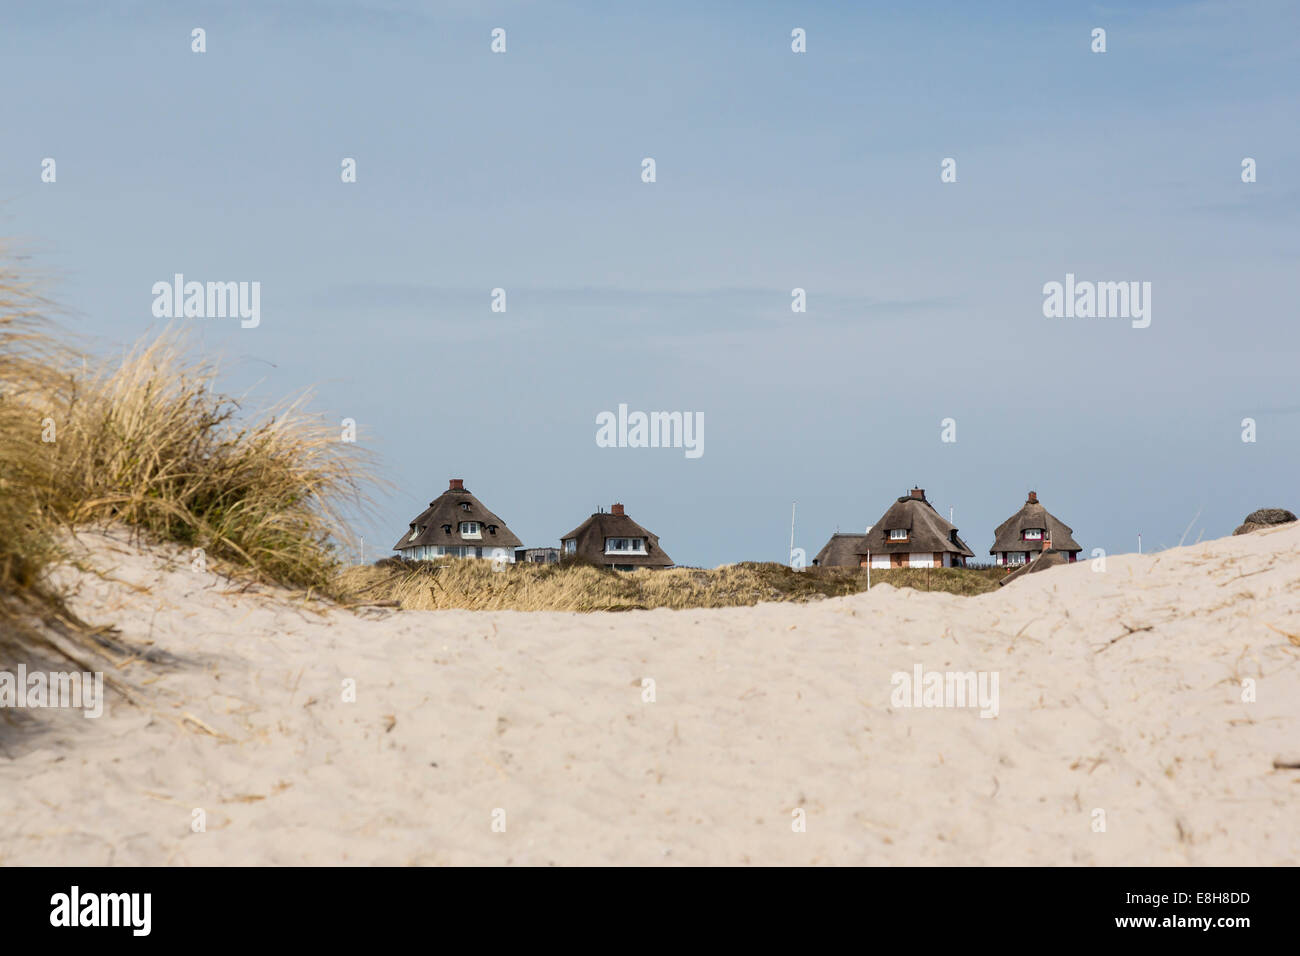 Germany, Schleswig-Holstein, Sylt, Hoernum, Odde, thatched-roof houses at dune Stock Photo